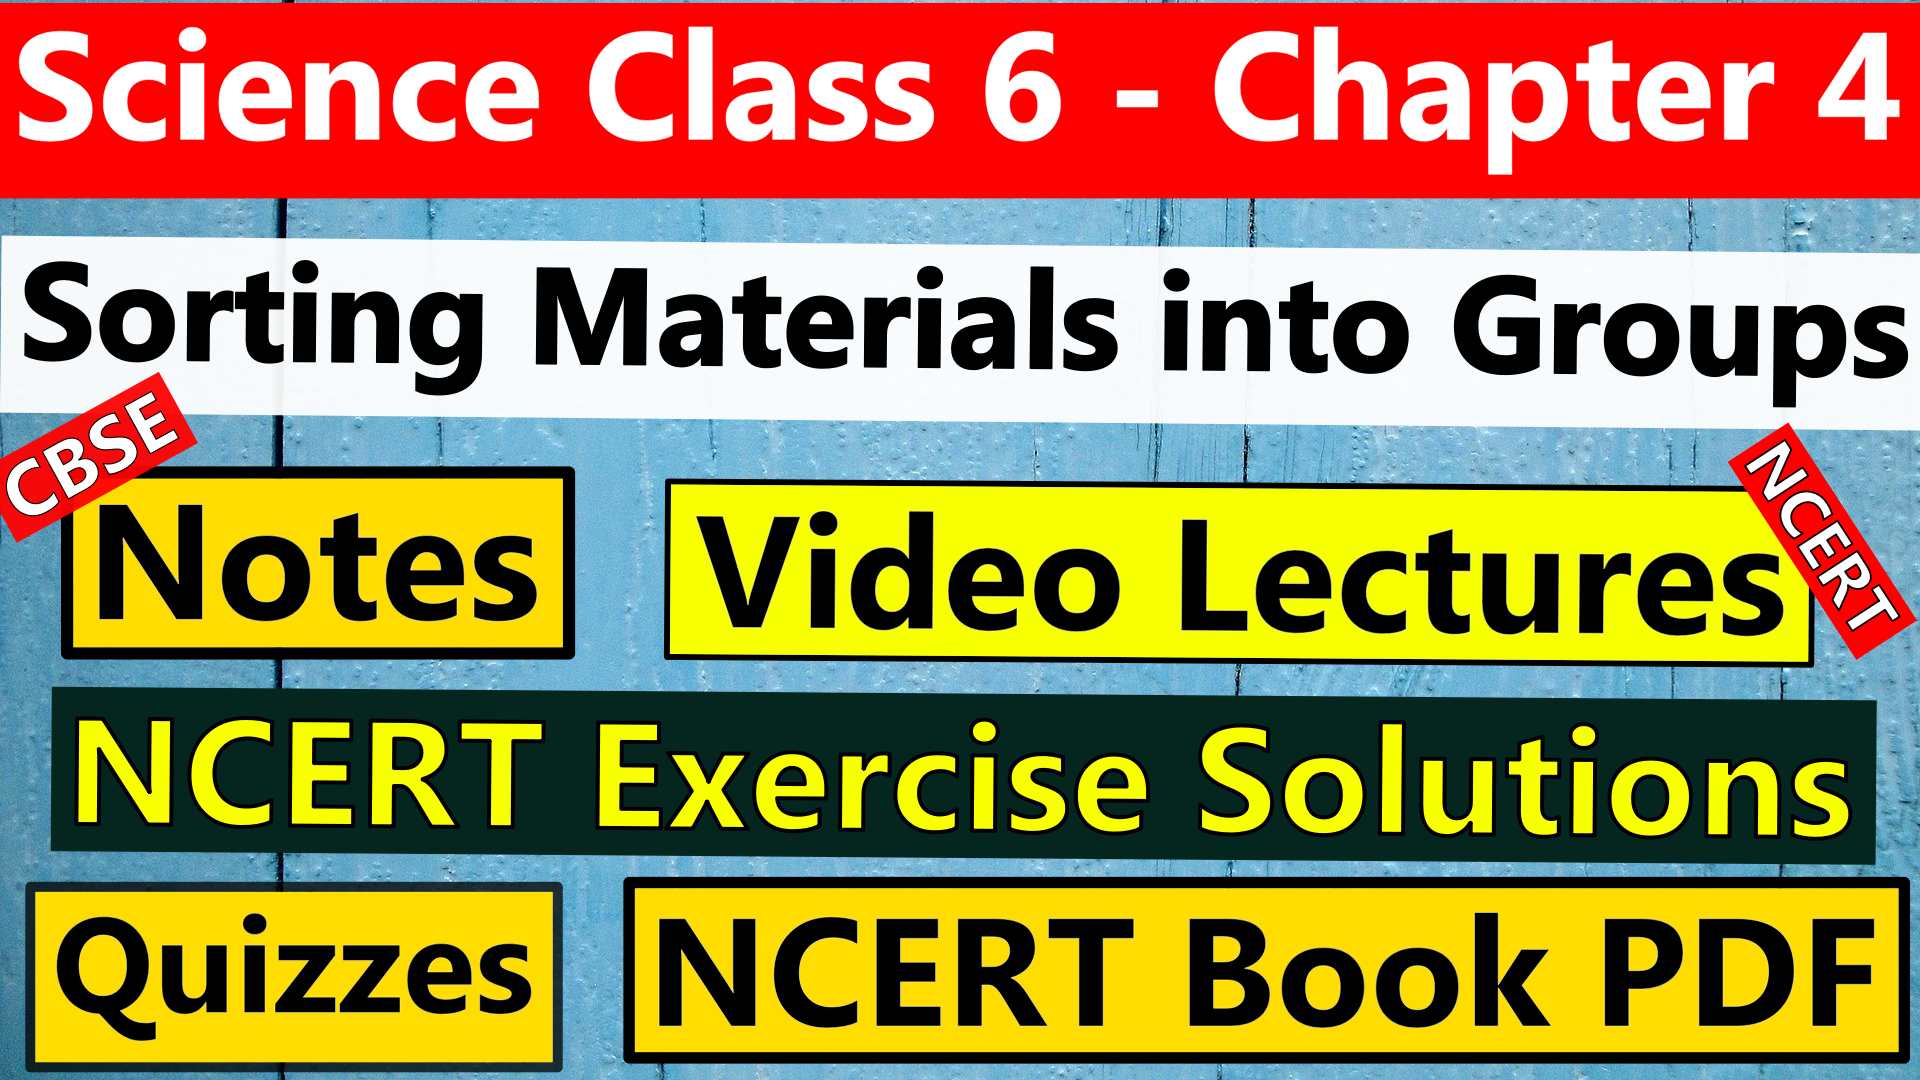 CBSE Science Class 6 - Chapter 4 - Sorting Materials into Groups- Notes, Video Lecture, NCERT Exercise Solution, Quizzes, NCERT Book Chapter 4 PDF Download.